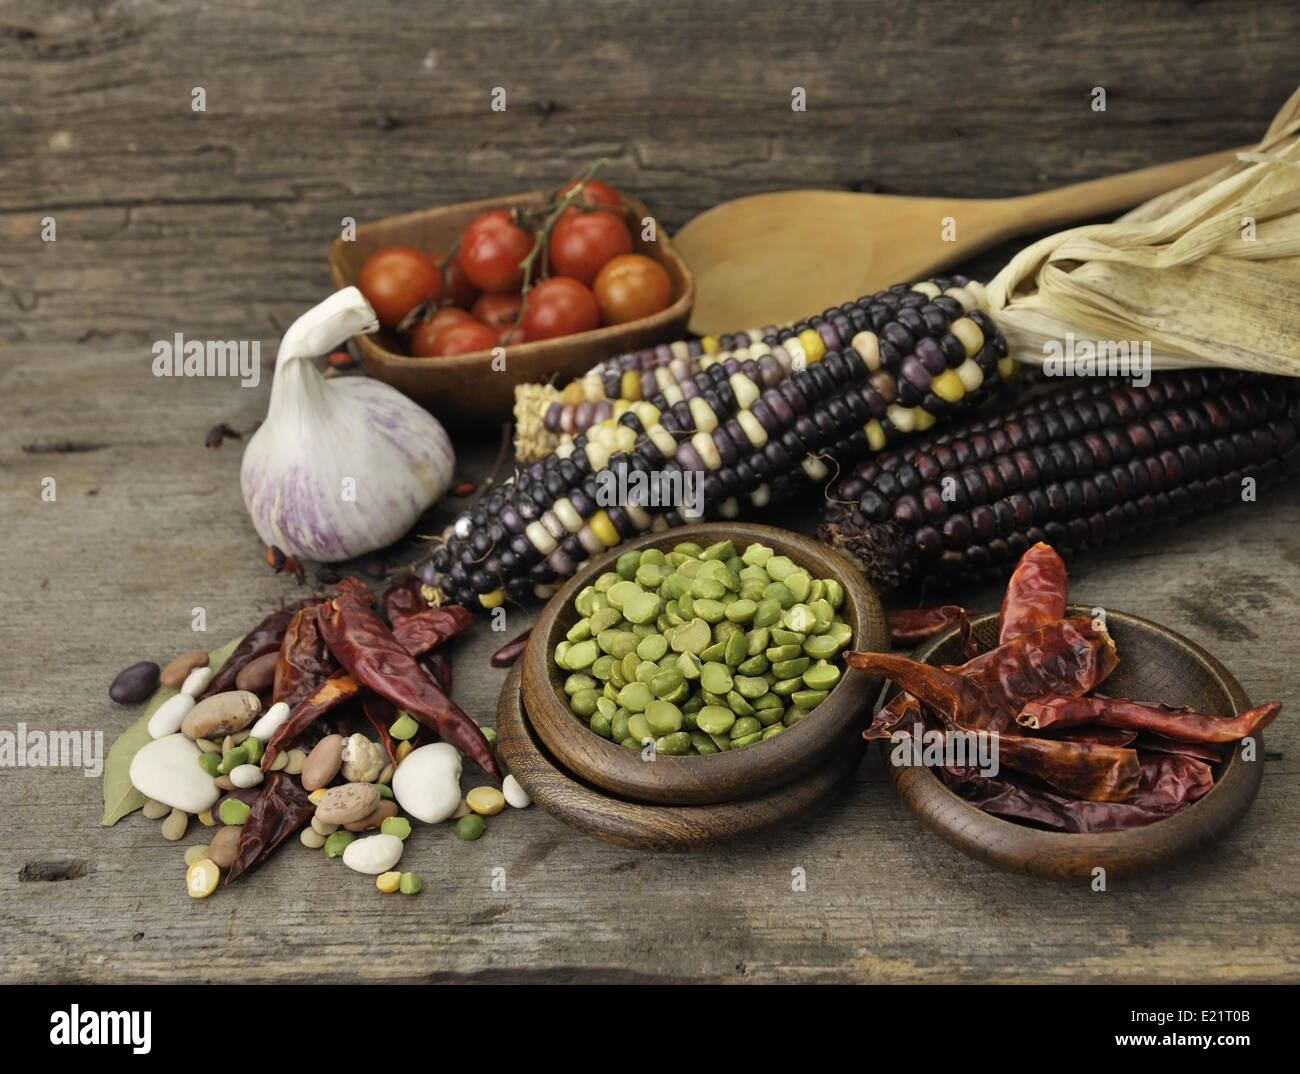 Green Dry Peas And Bean Mix Stock Photo